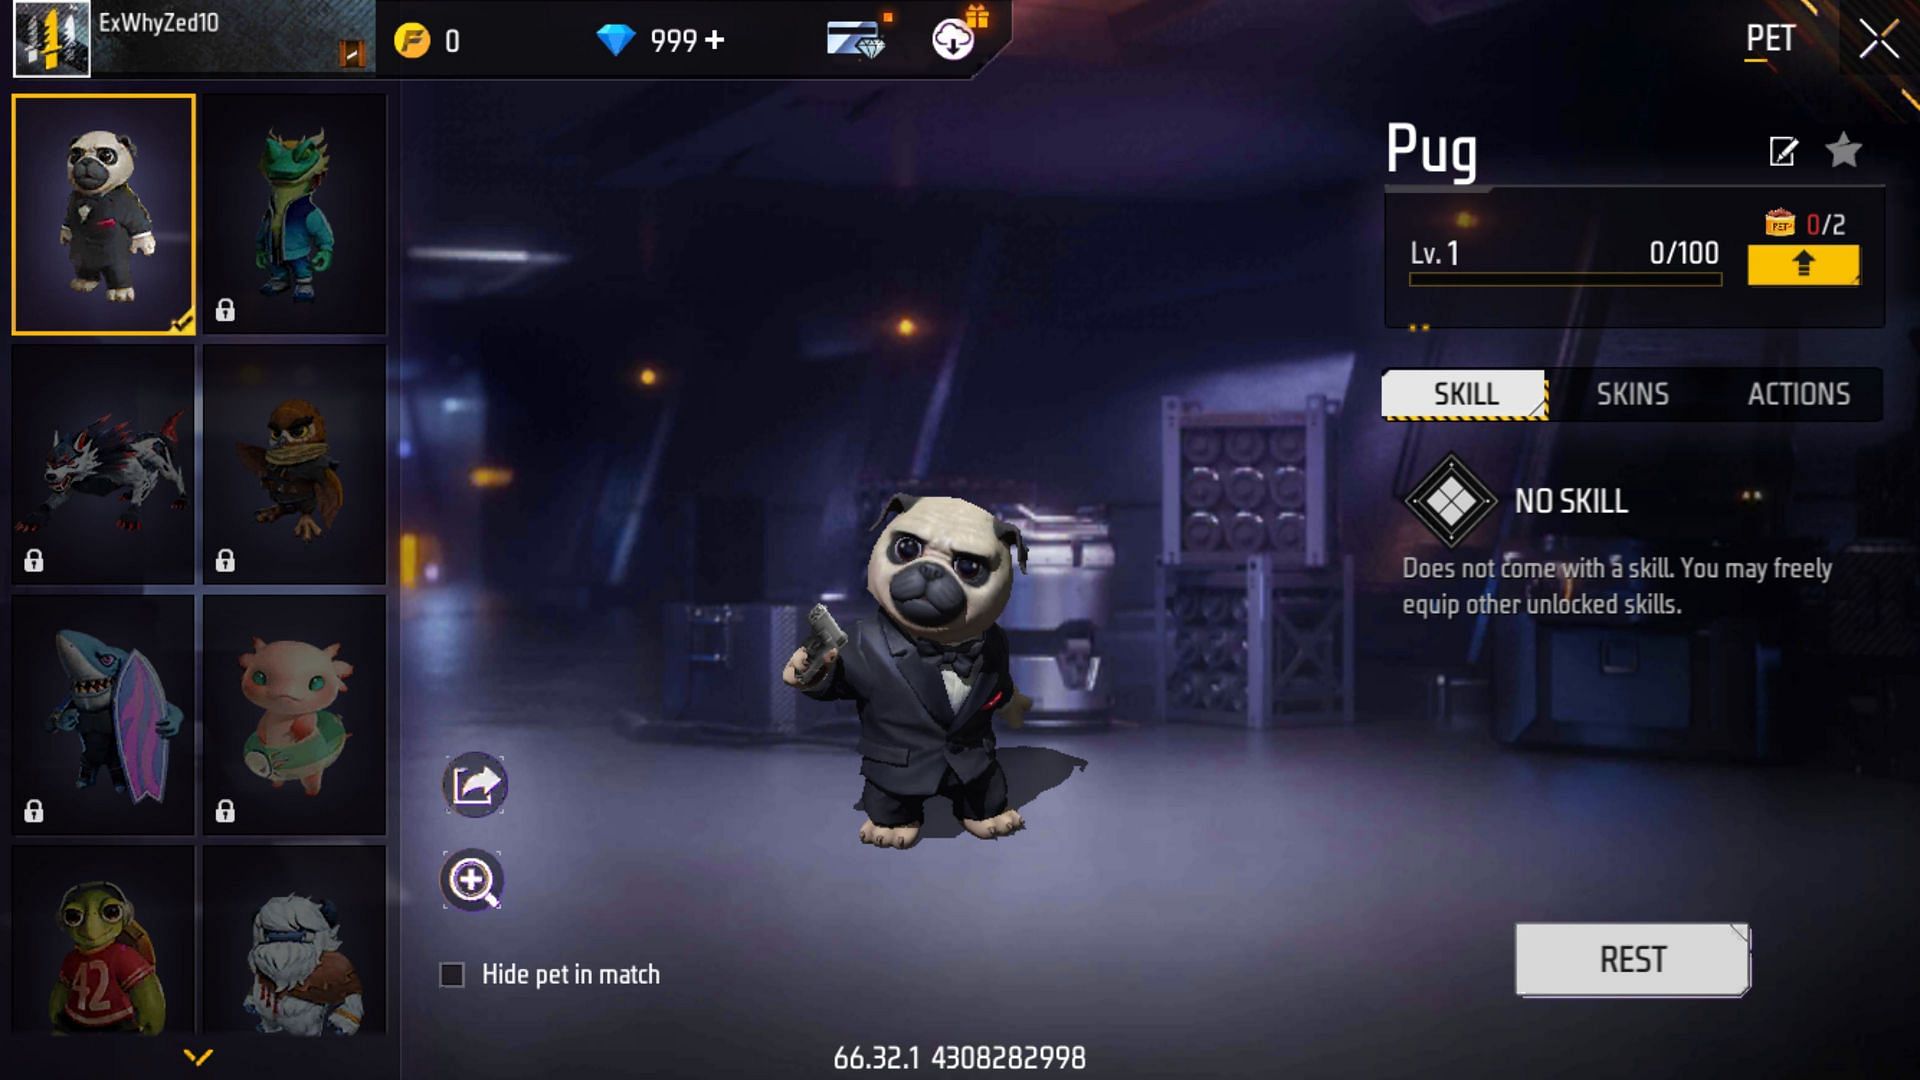 Pug is the new pet in the Free Fire OB40 Advance Server (Image via Garena)